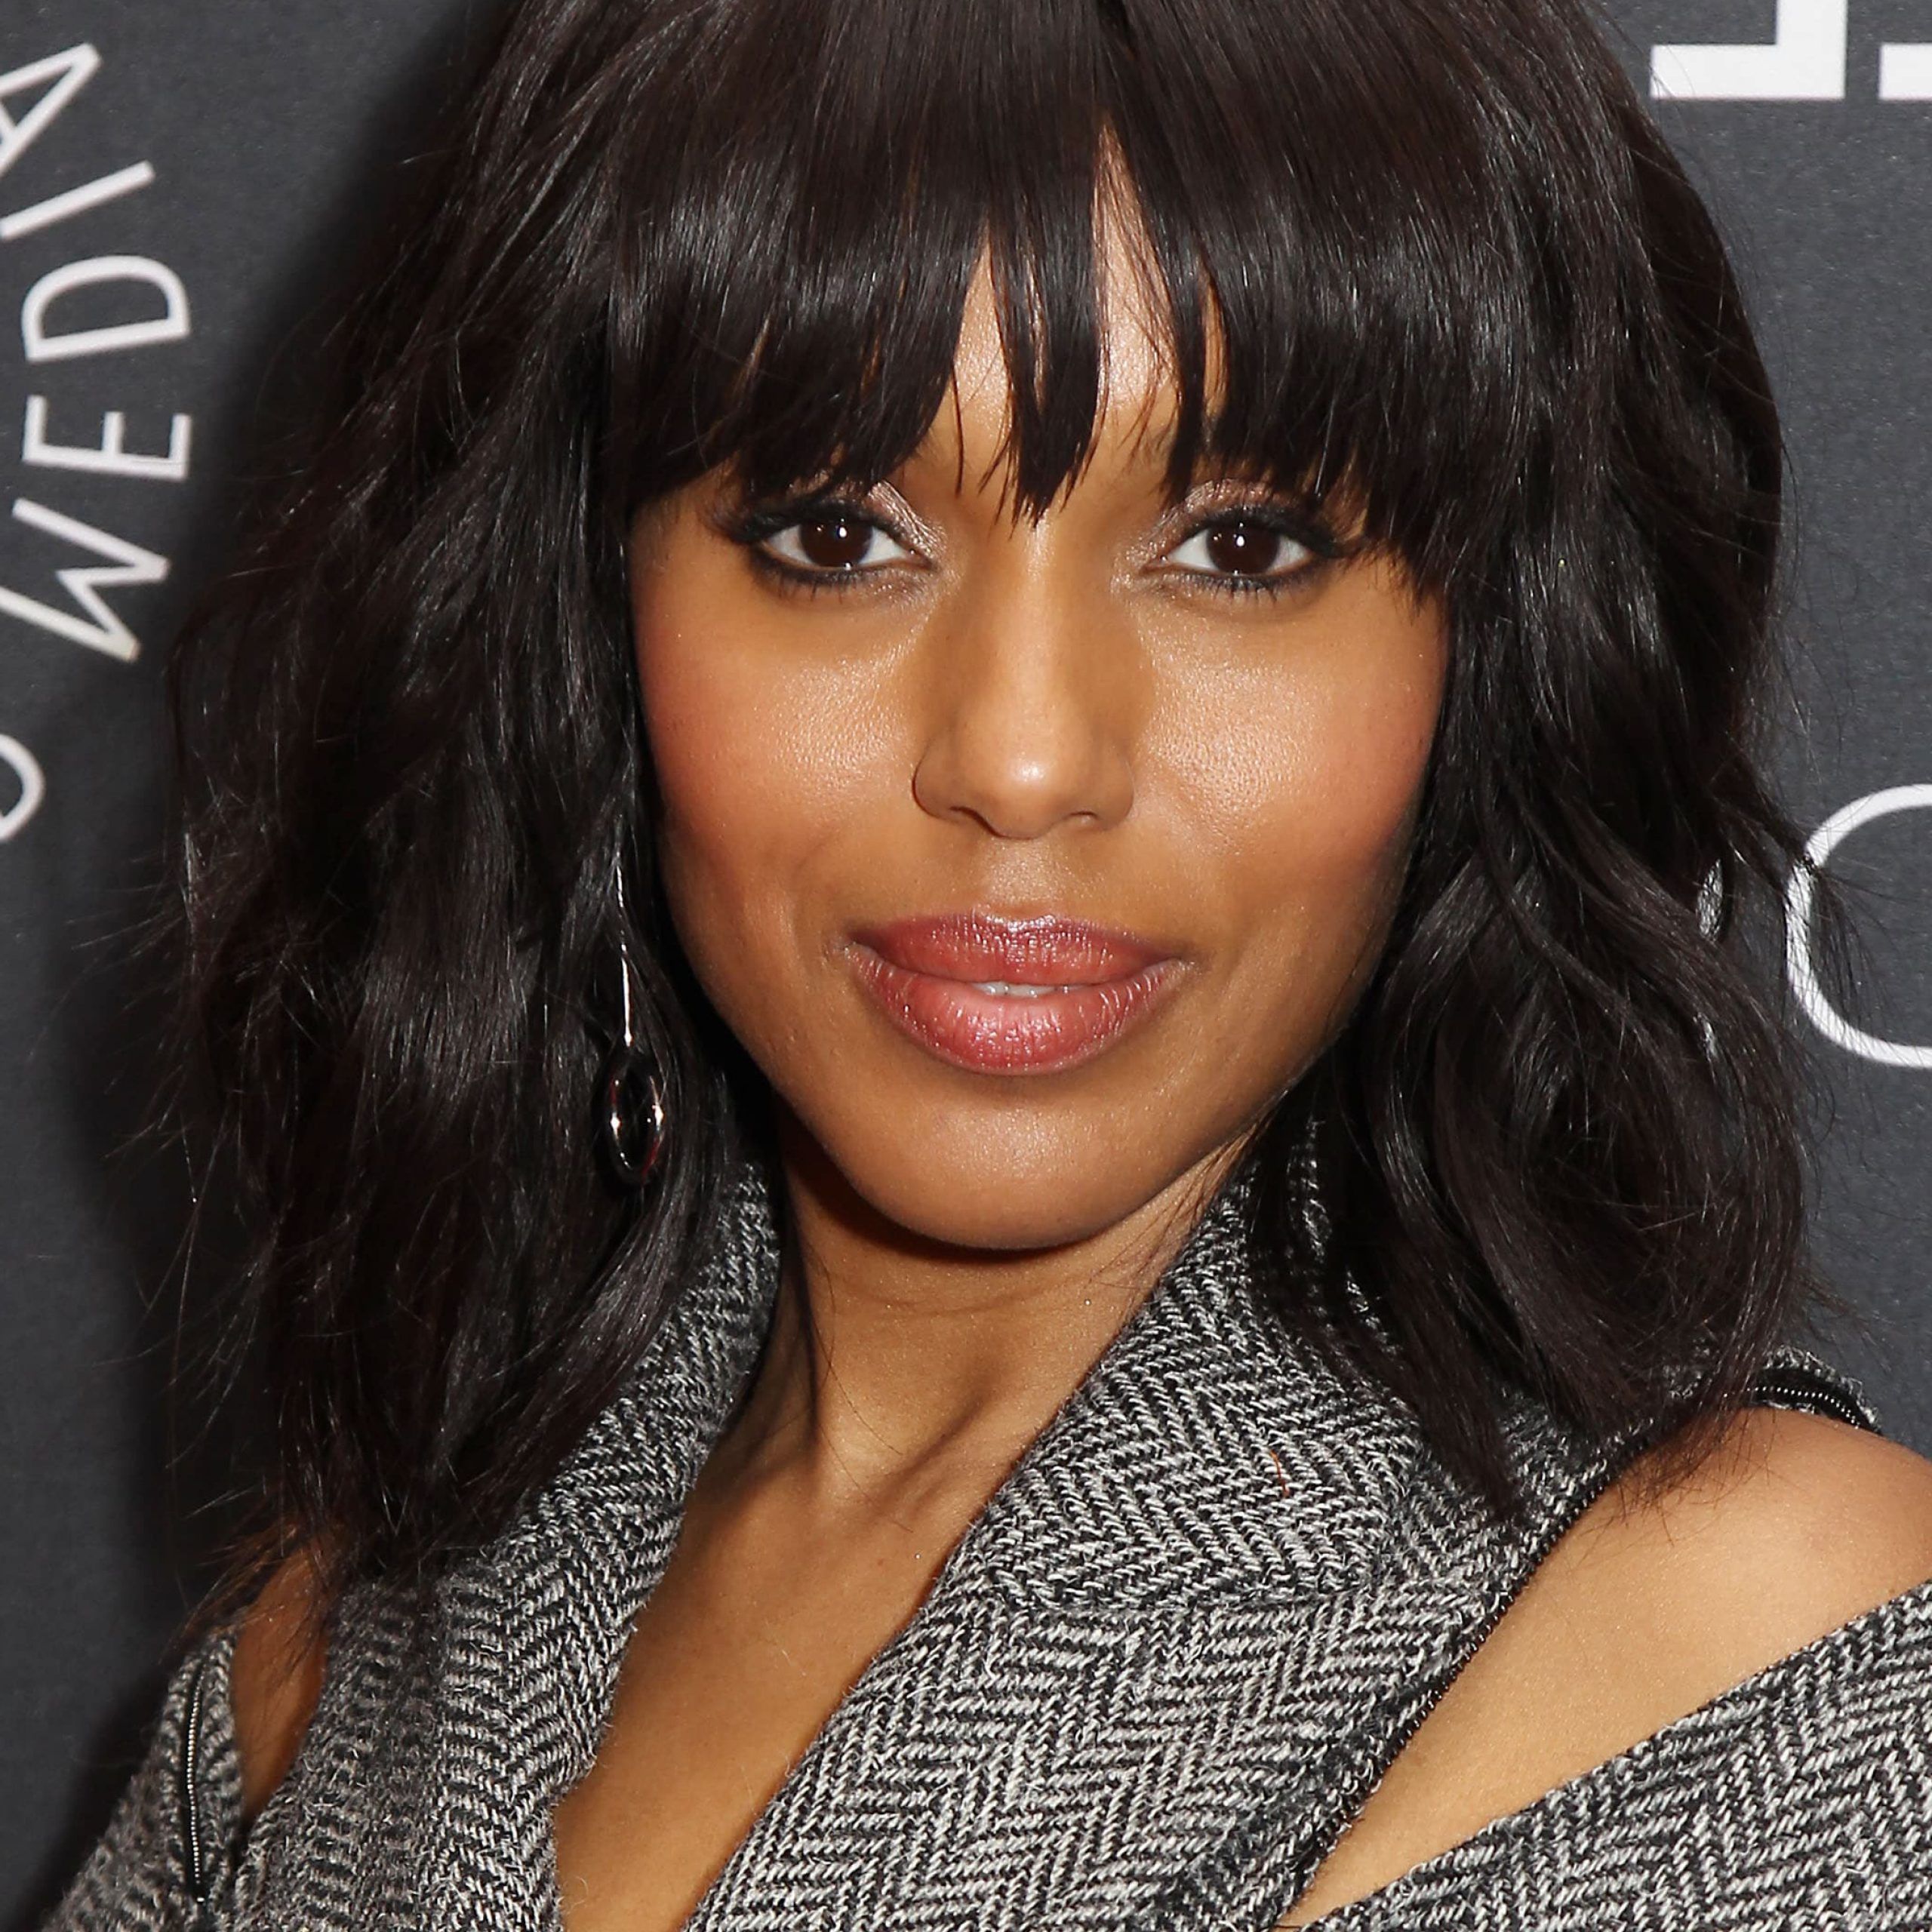 Wavy Hair With Bangs: 7 Star Studded Looks To Try Now With 2018 Medium Length Haircuts With Arched Bangs (View 5 of 25)